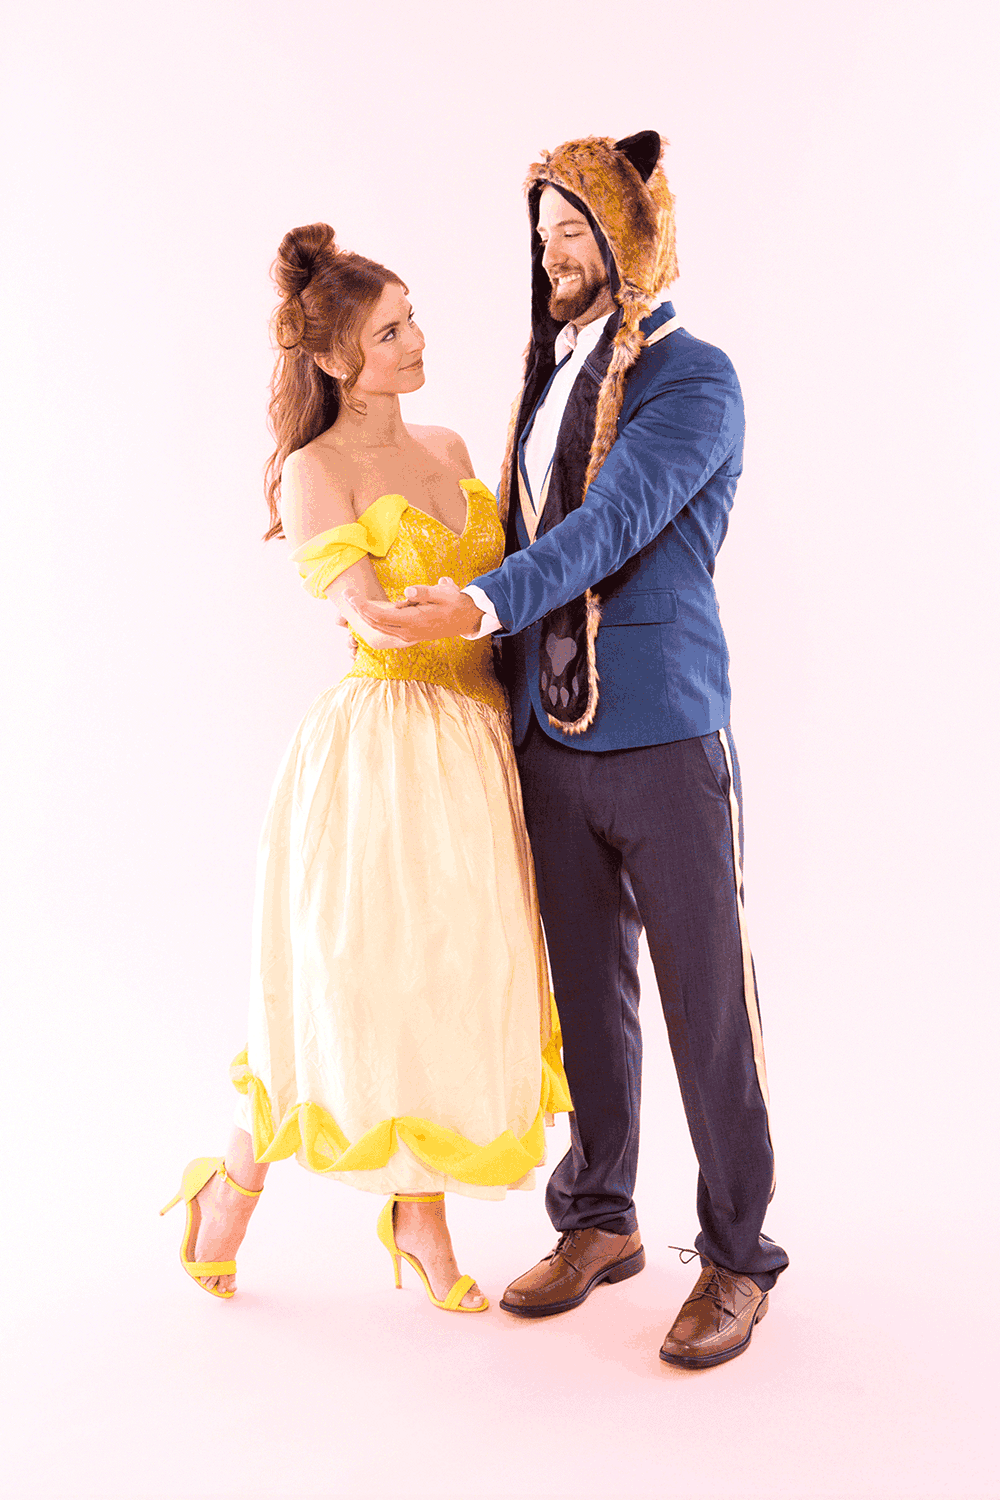 Beauty and the Beast Couples Halloween Costume